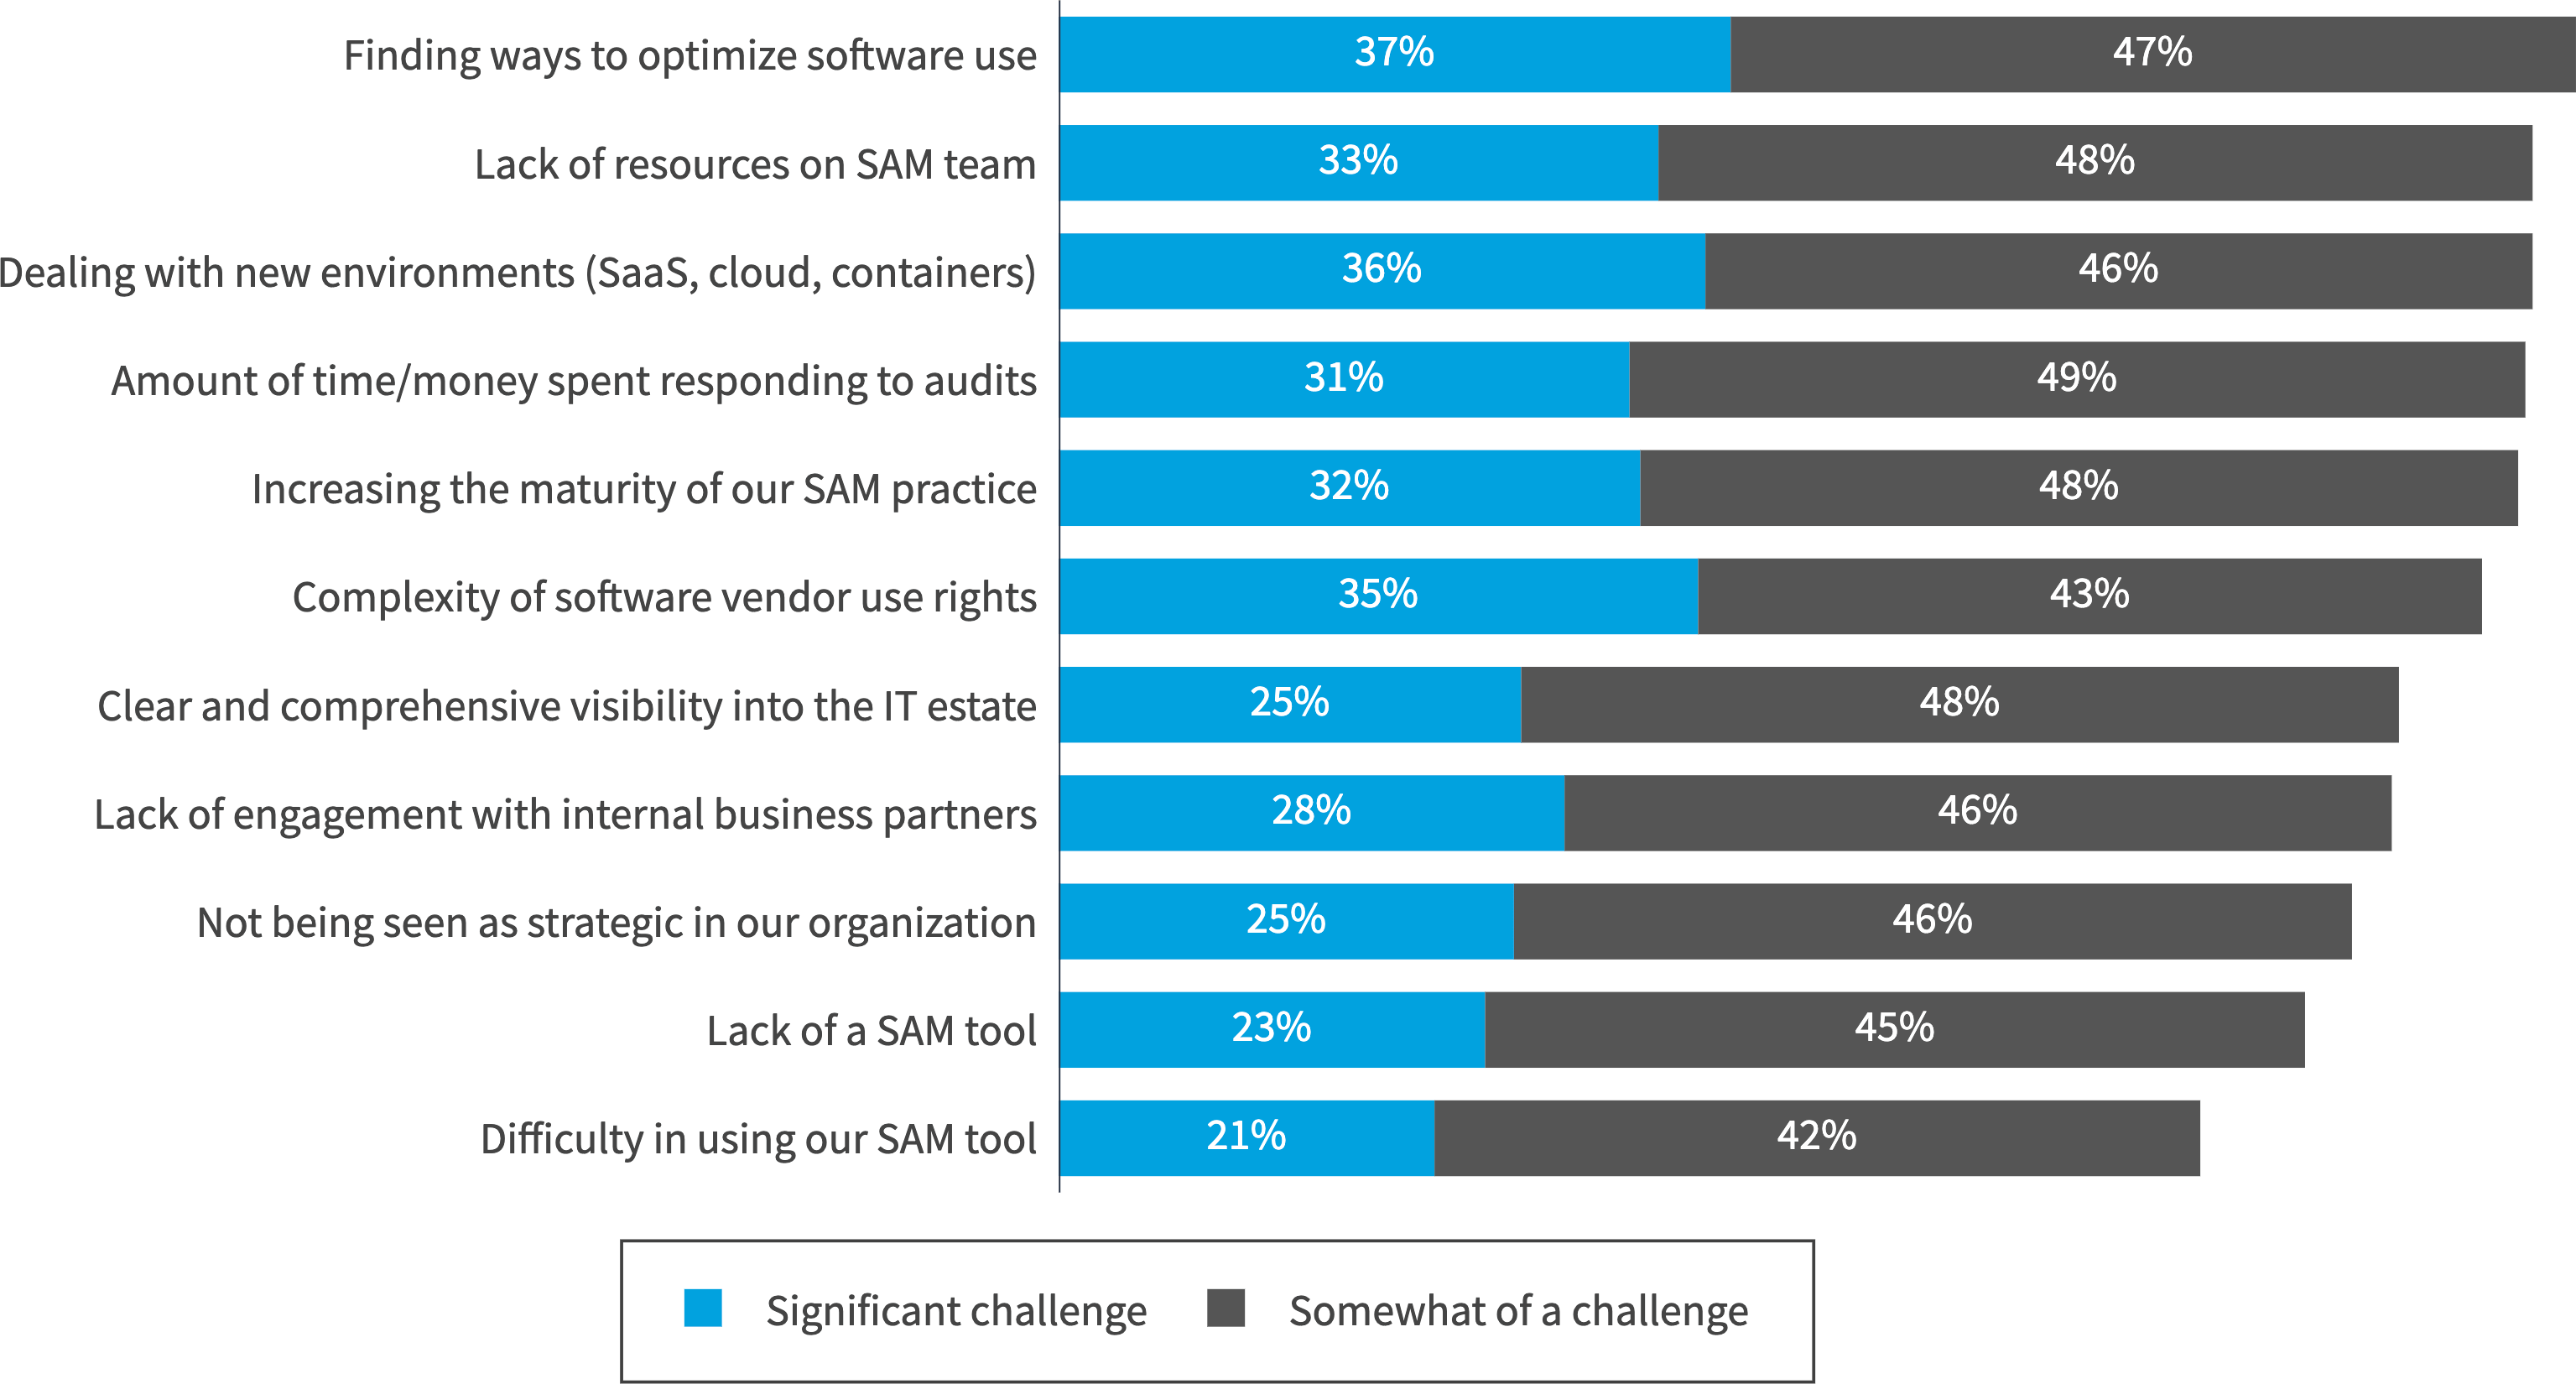 Chart: What are your challenges with SAM?